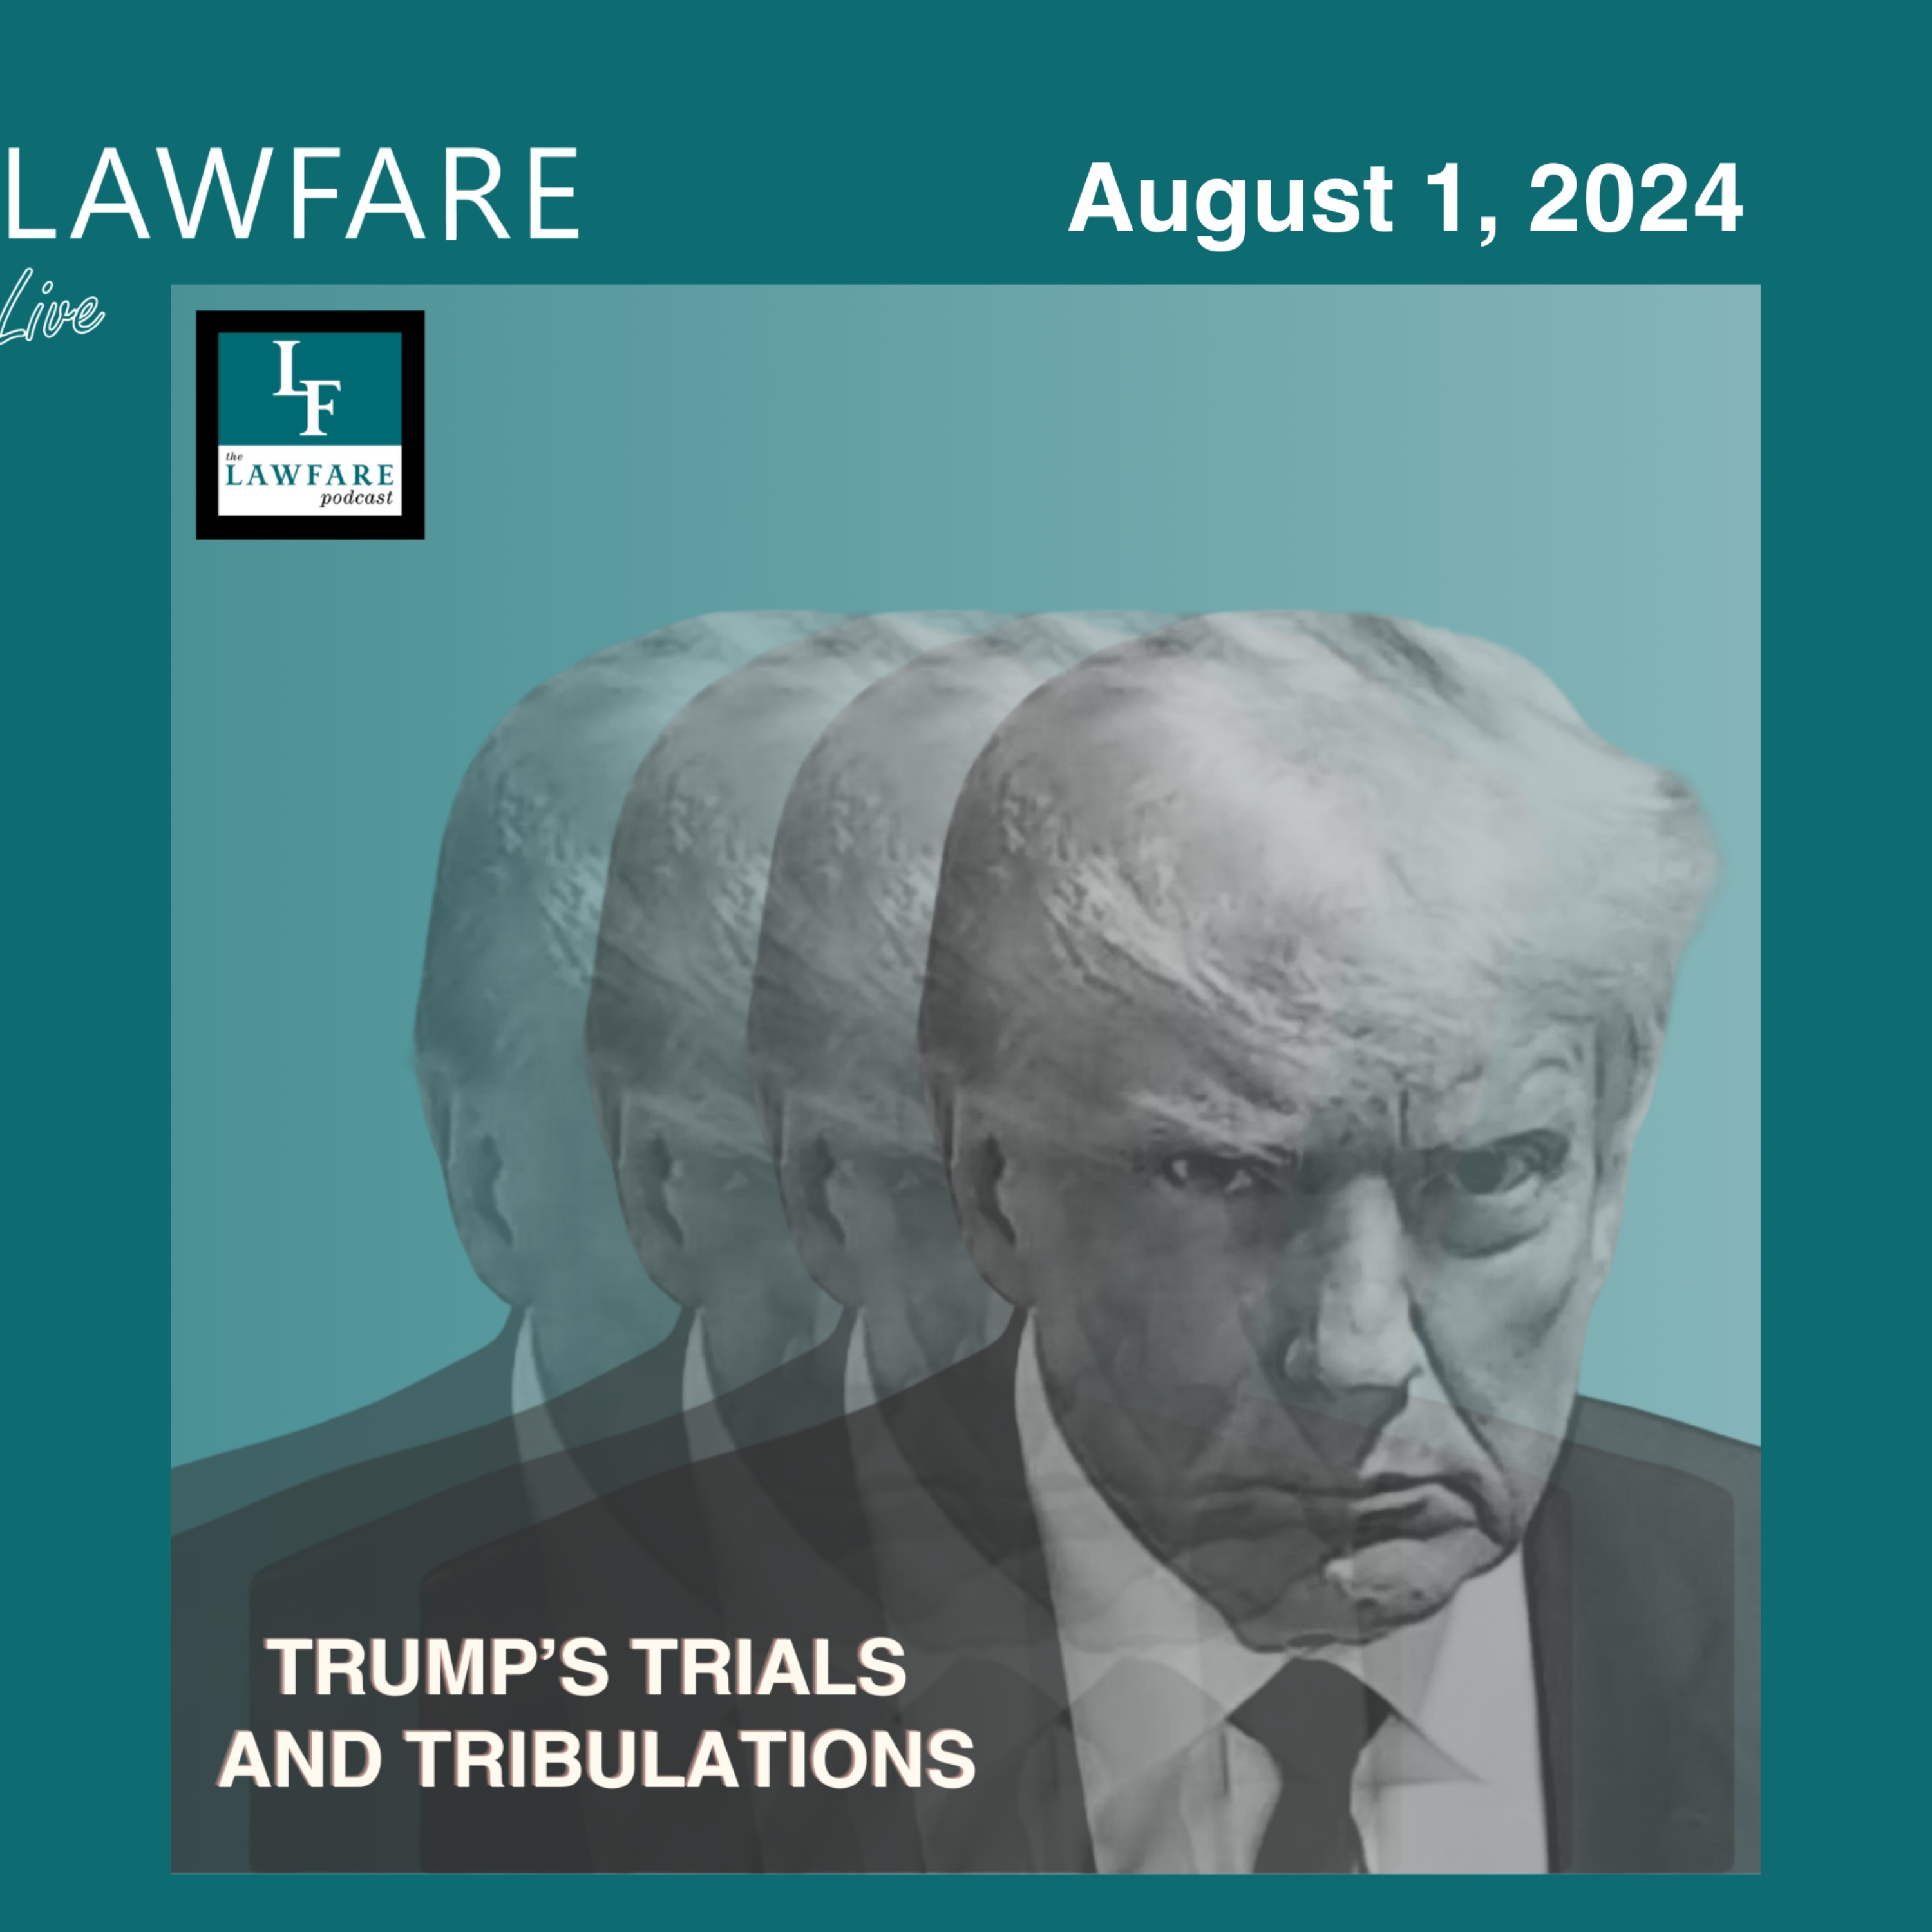 Lawfare Daily: Trump Trials and Tribulations Weekly Round-up (August 1, 2024)